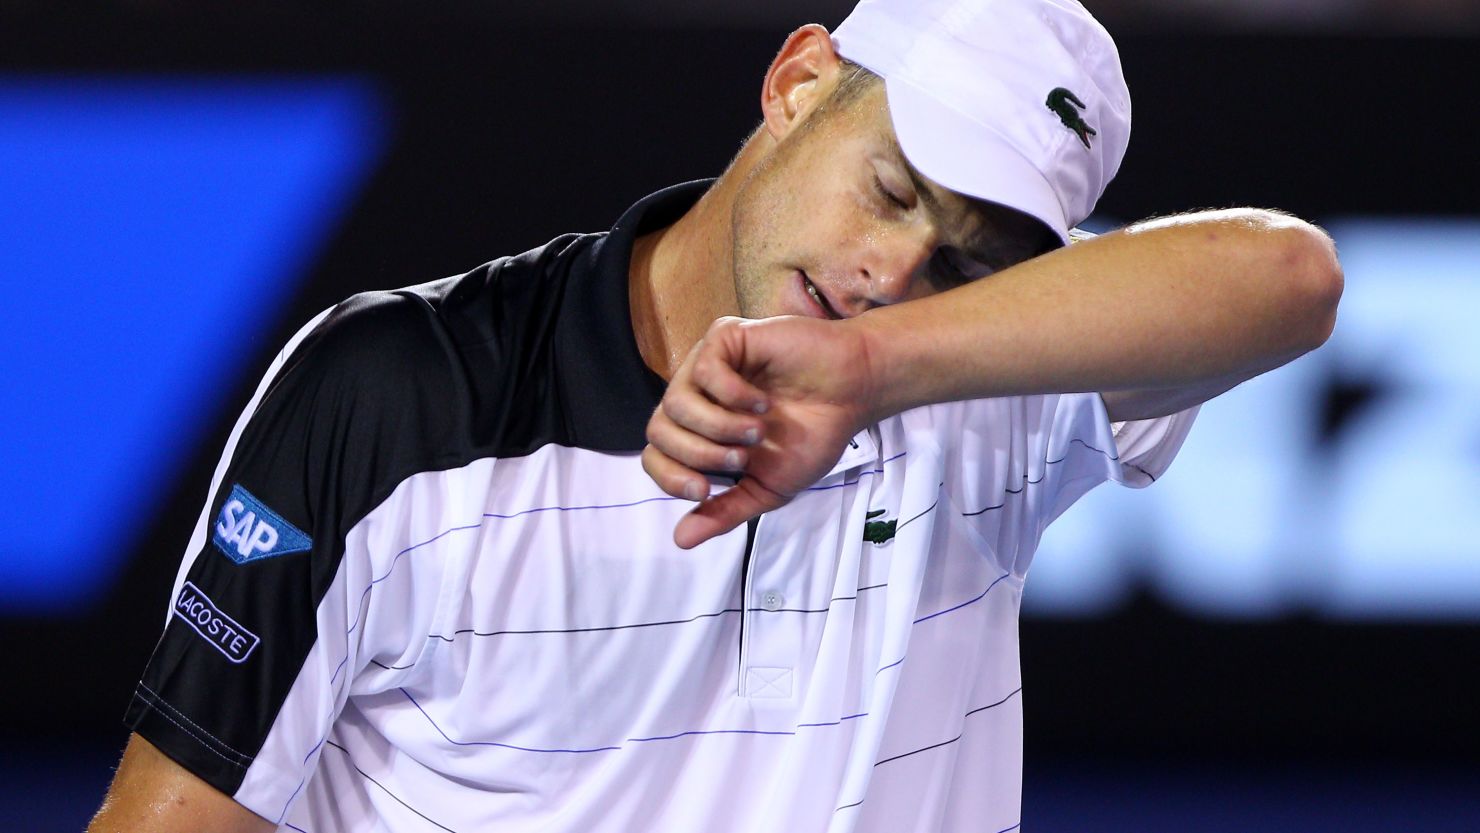 American former world No. 1 Andy Roddick won the only grand slam title of his career at the 2003 U.S. Open.